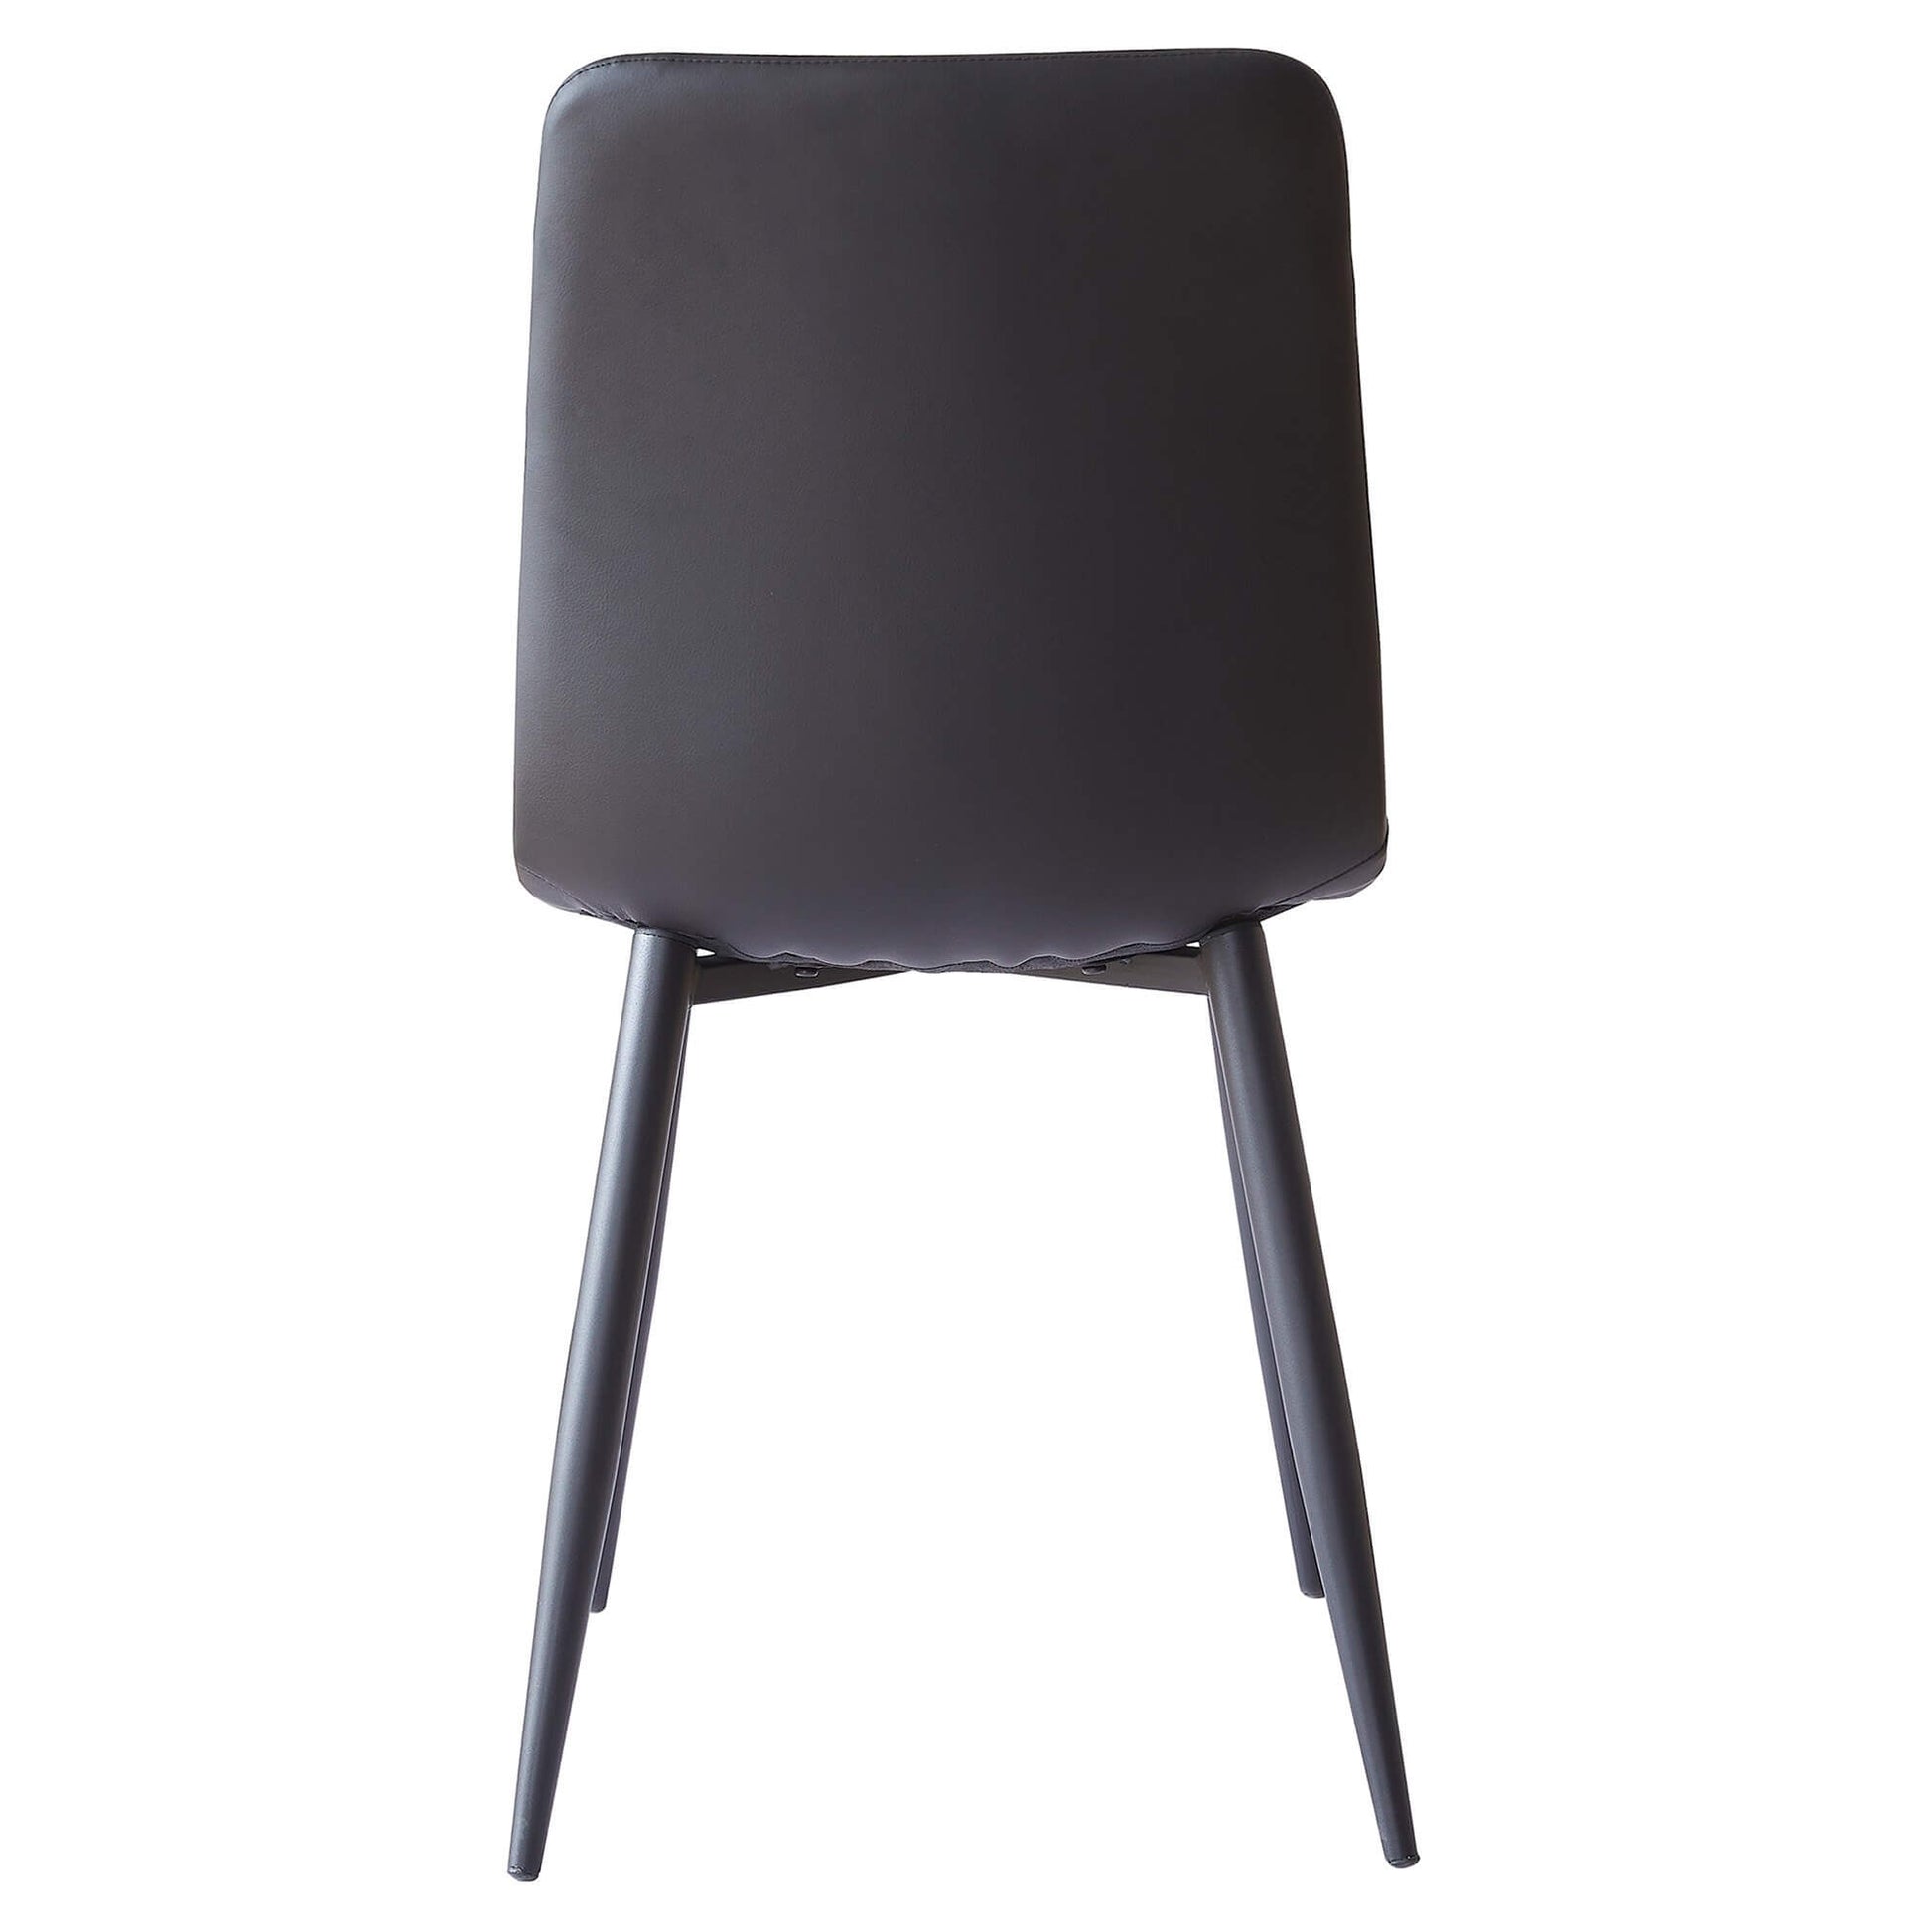 Maryland | Modern PU leather Ultra Suede Fabric Dining Chairs | Set Of 4 | Black